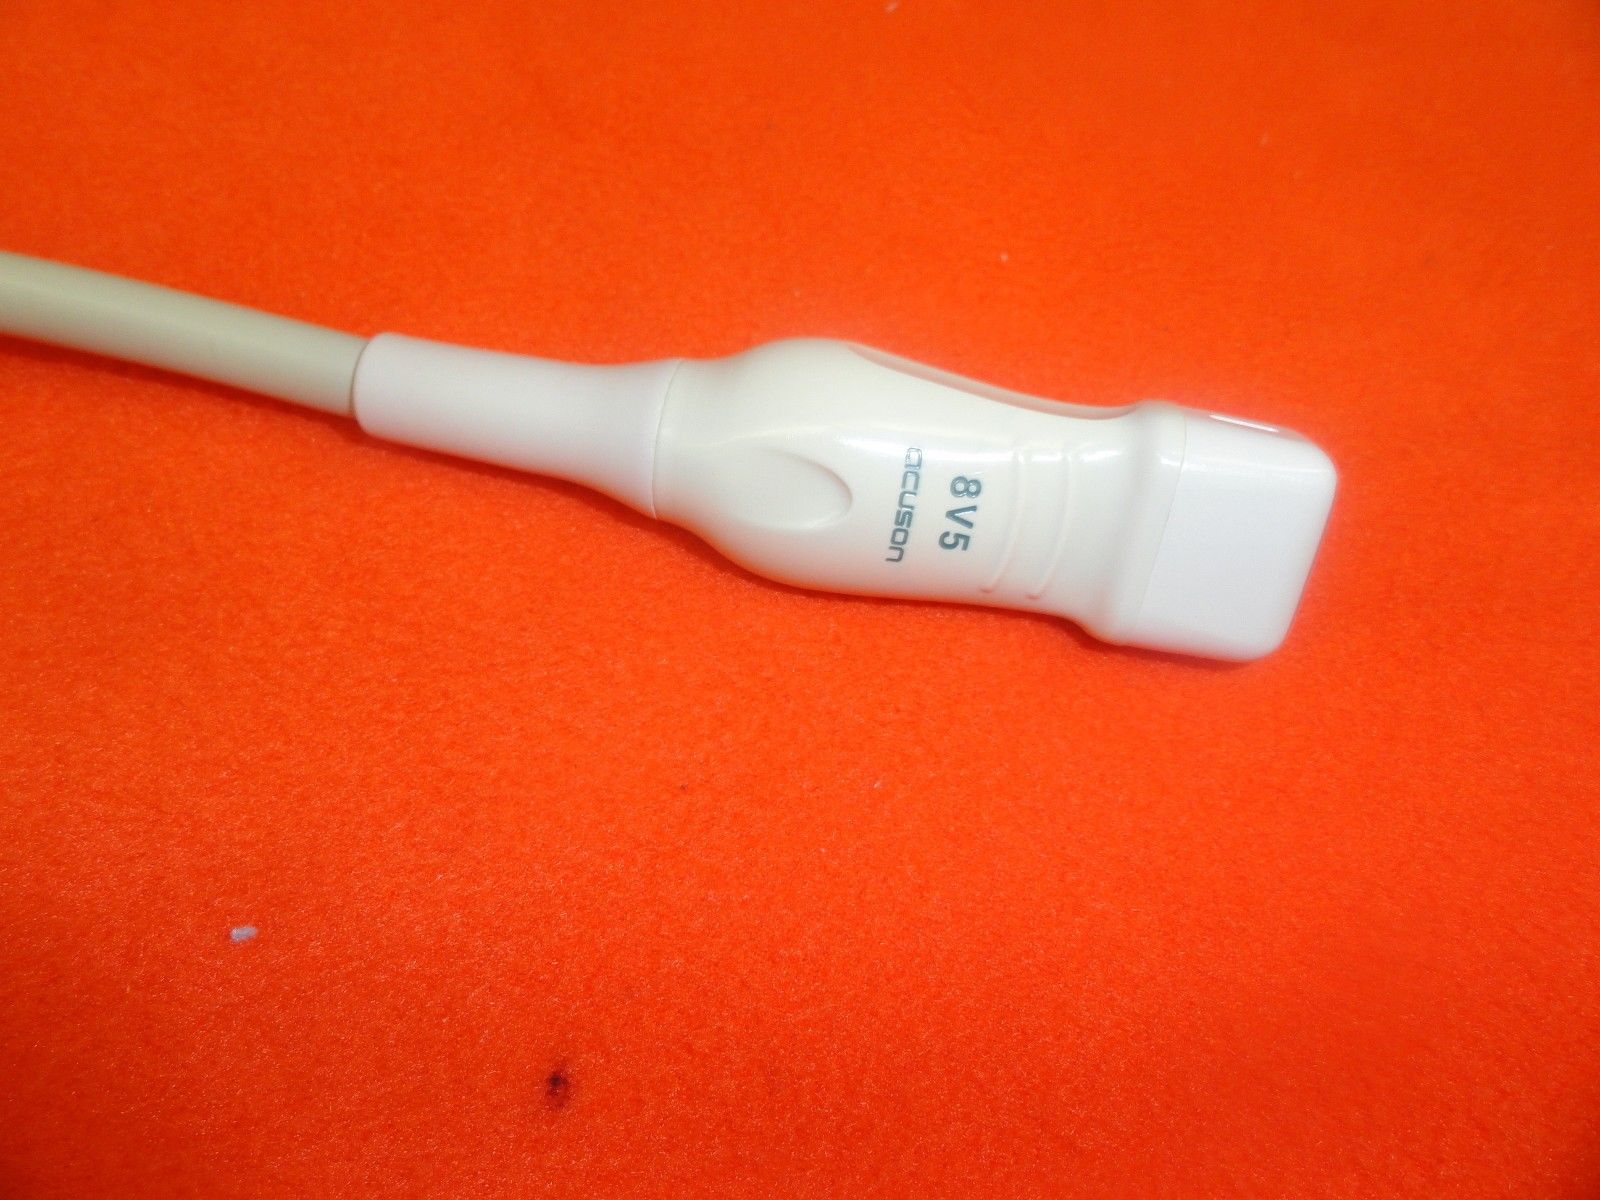 2004 Siemens Acuson 8V5 P/N 0824114 Ultrasound Probe W/ Pin-less connector (5812 DIAGNOSTIC ULTRASOUND MACHINES FOR SALE